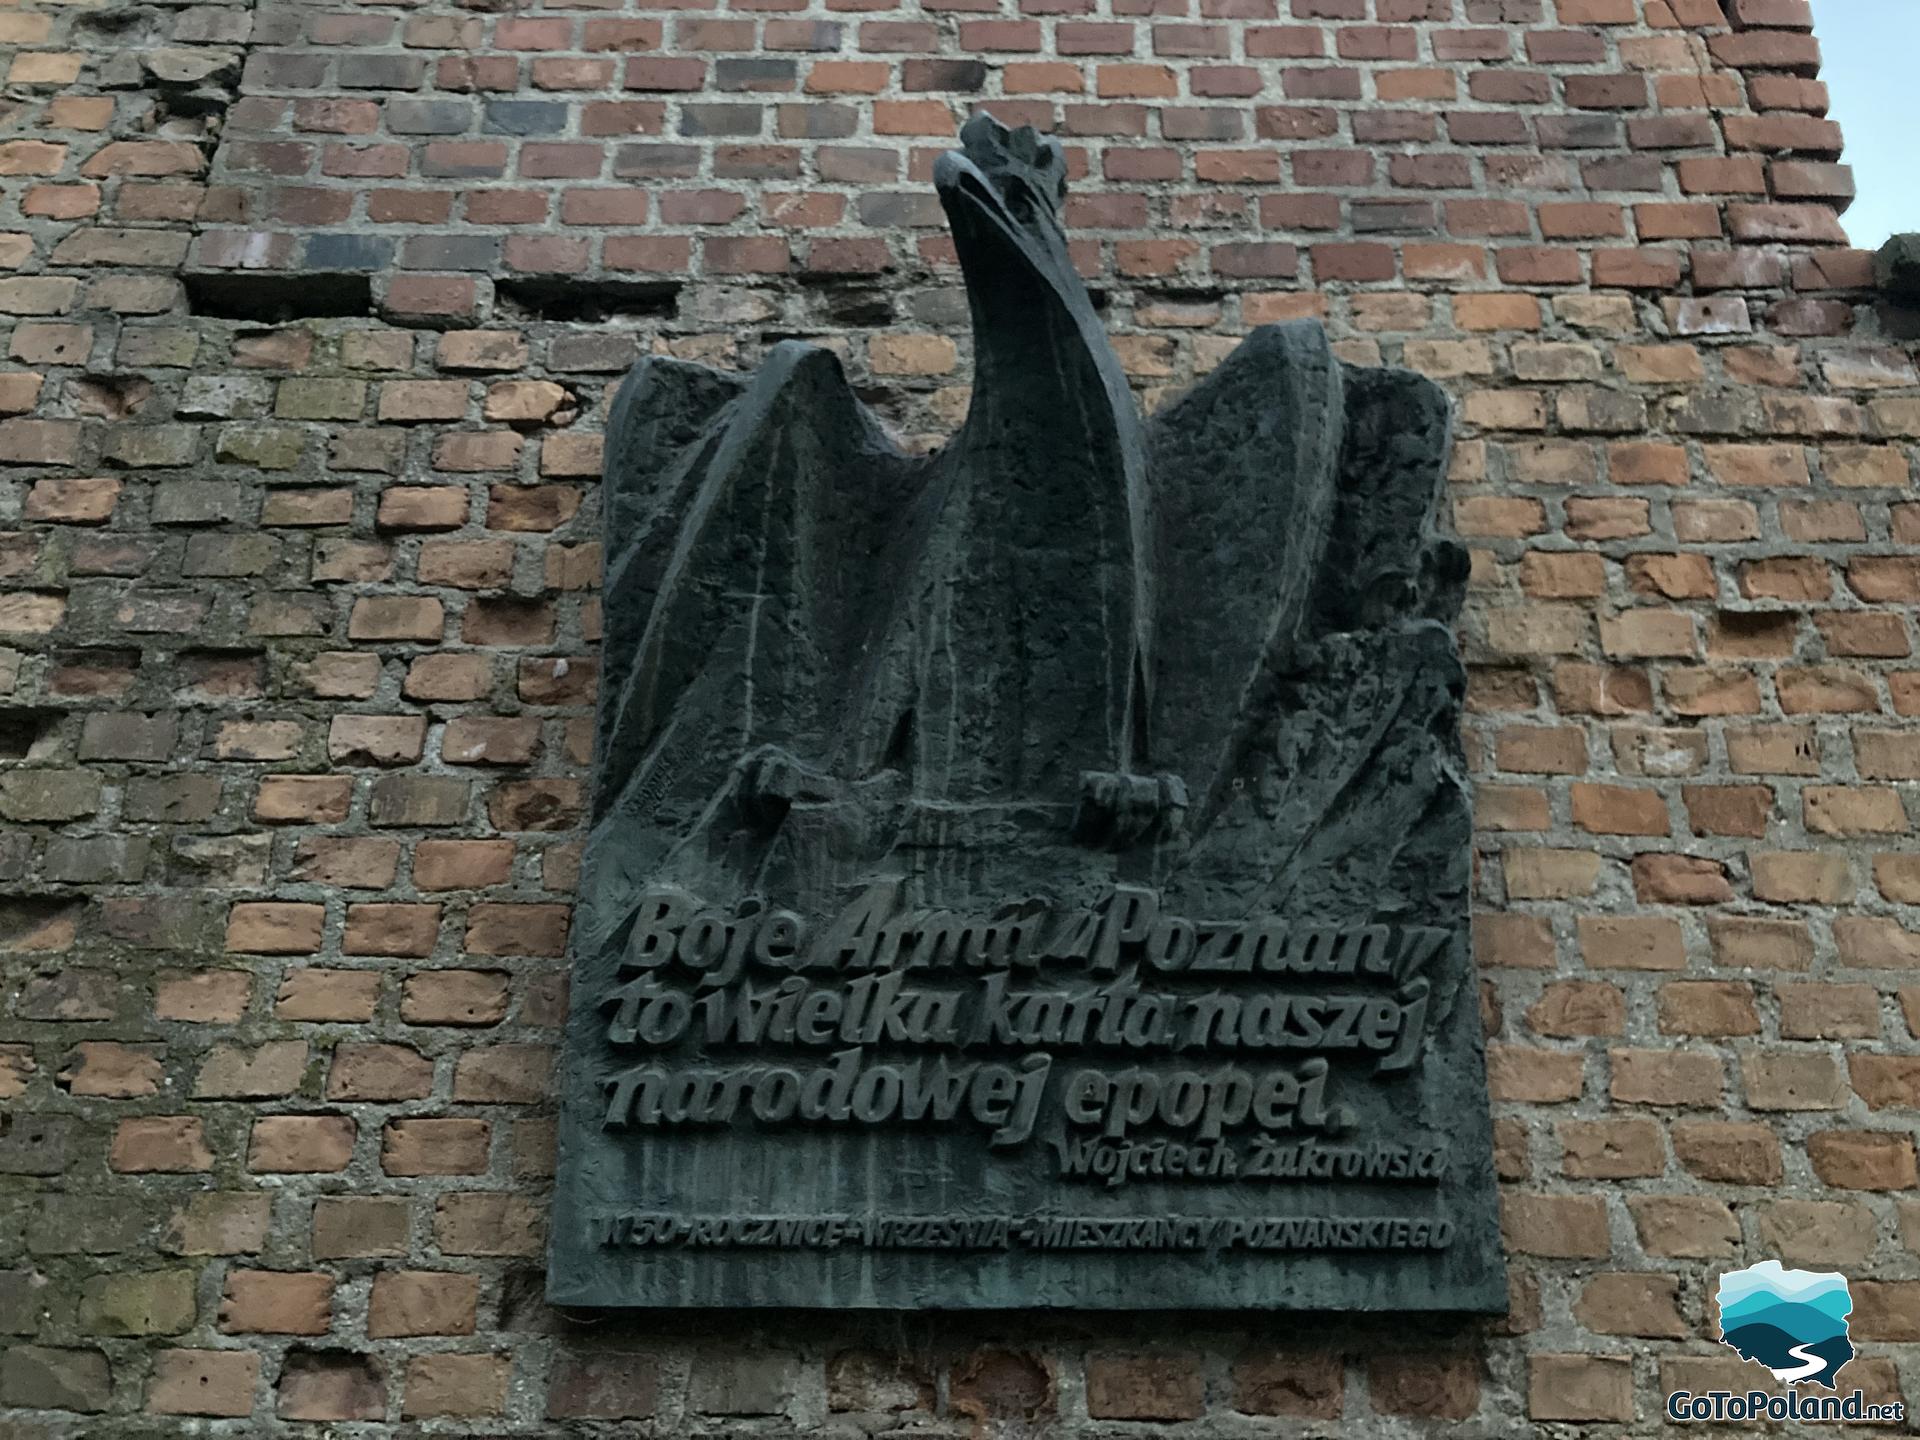 a statue of an eagle commemorating the soldiers of the Poznań Army